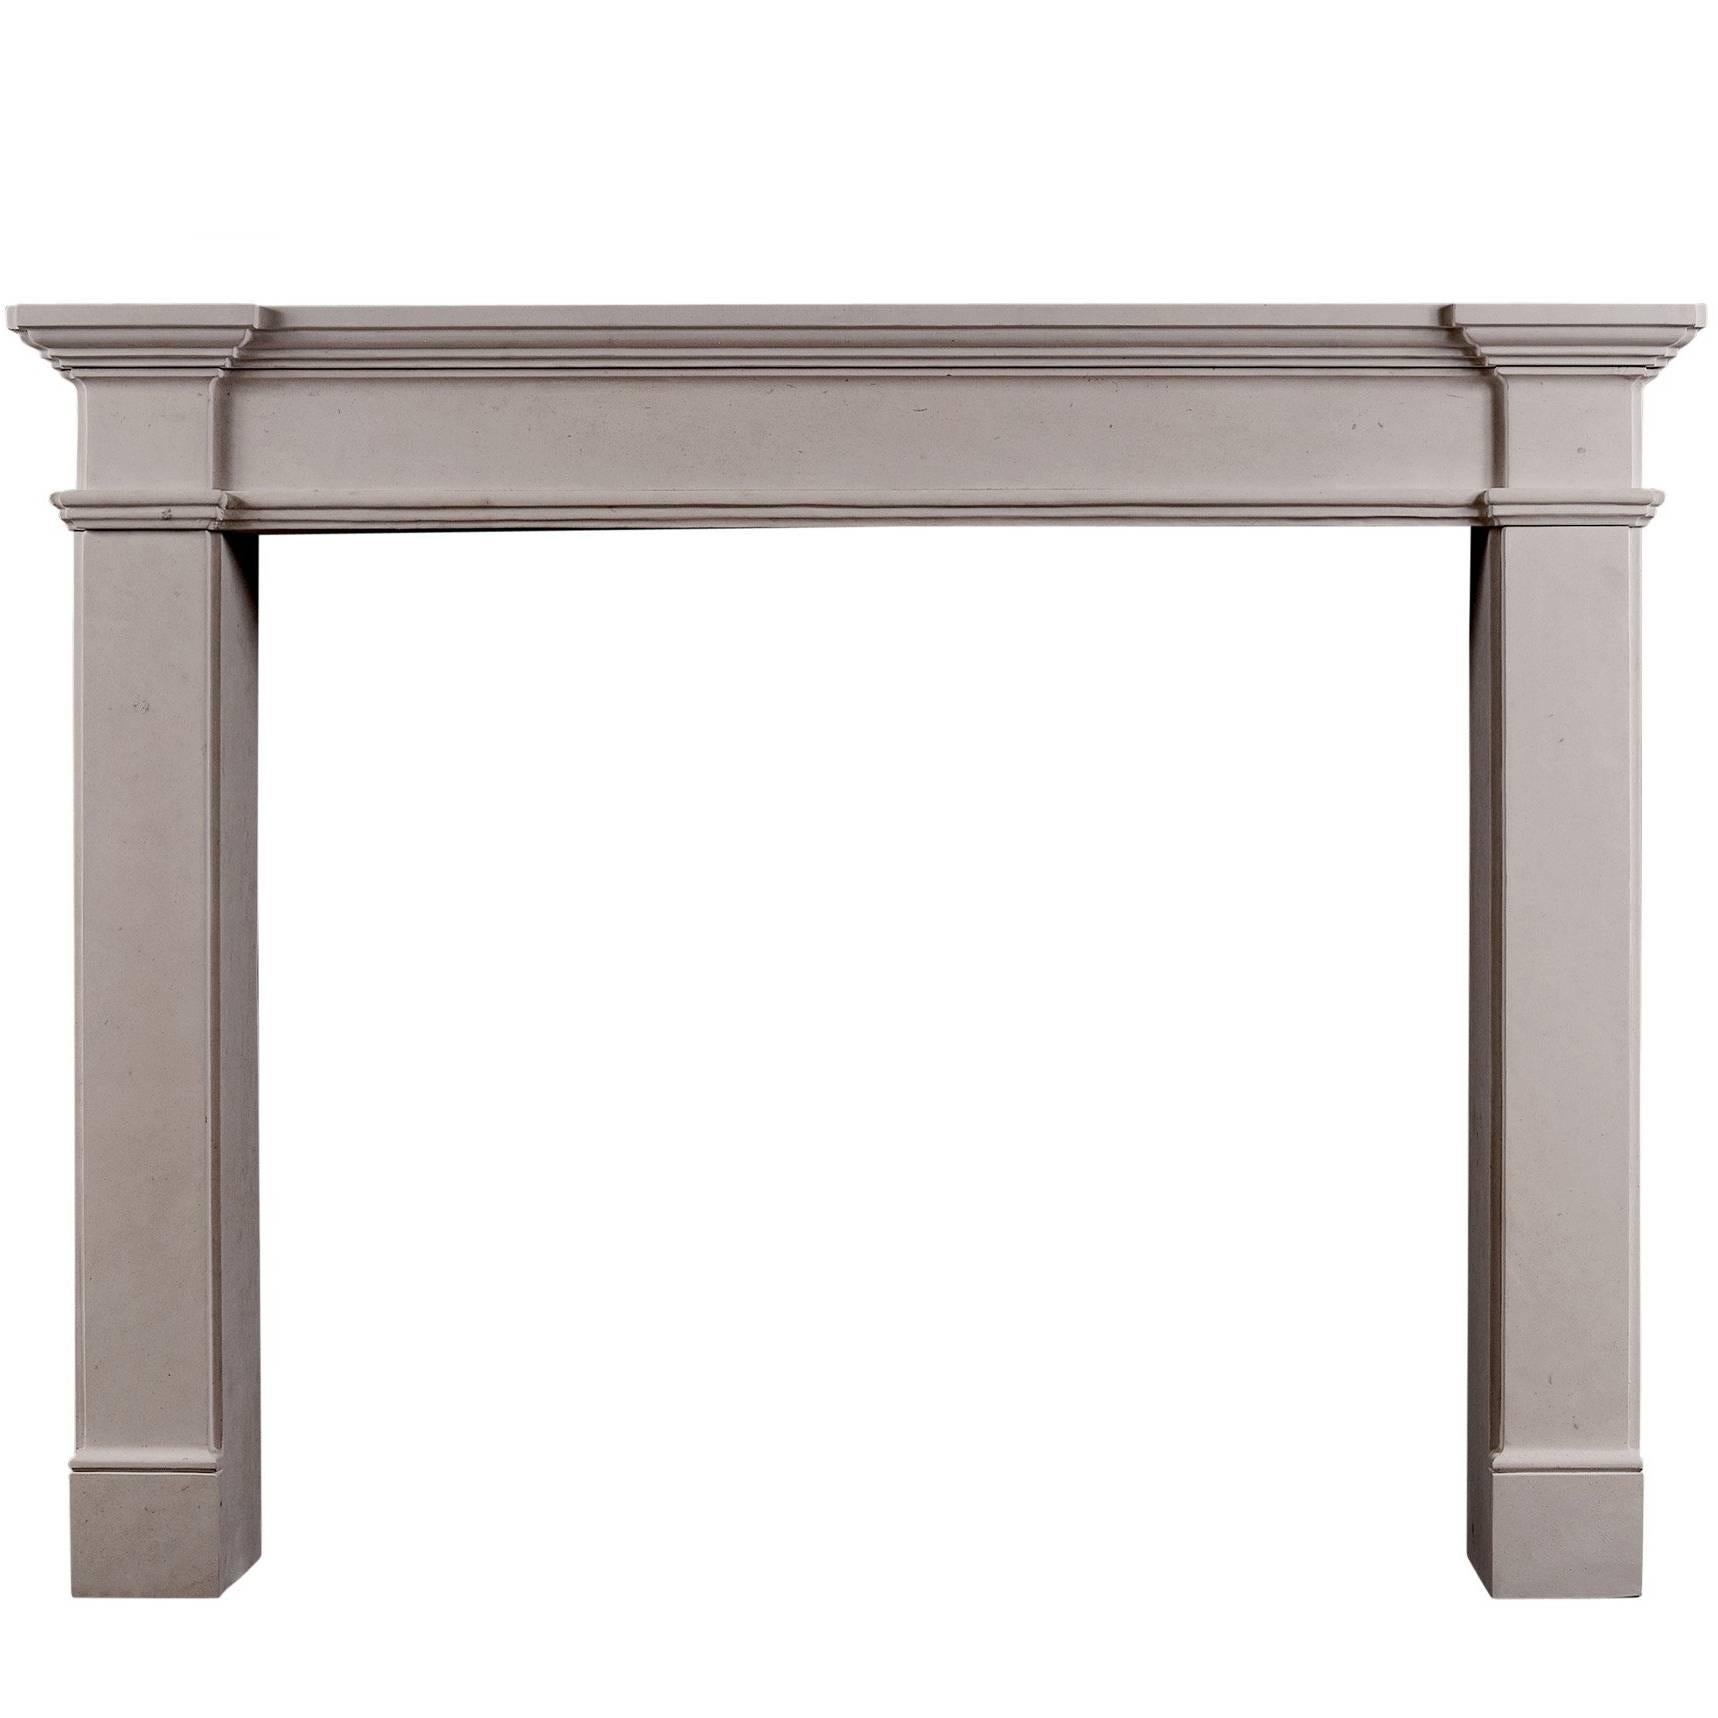 Architectural French Limestone Fireplace